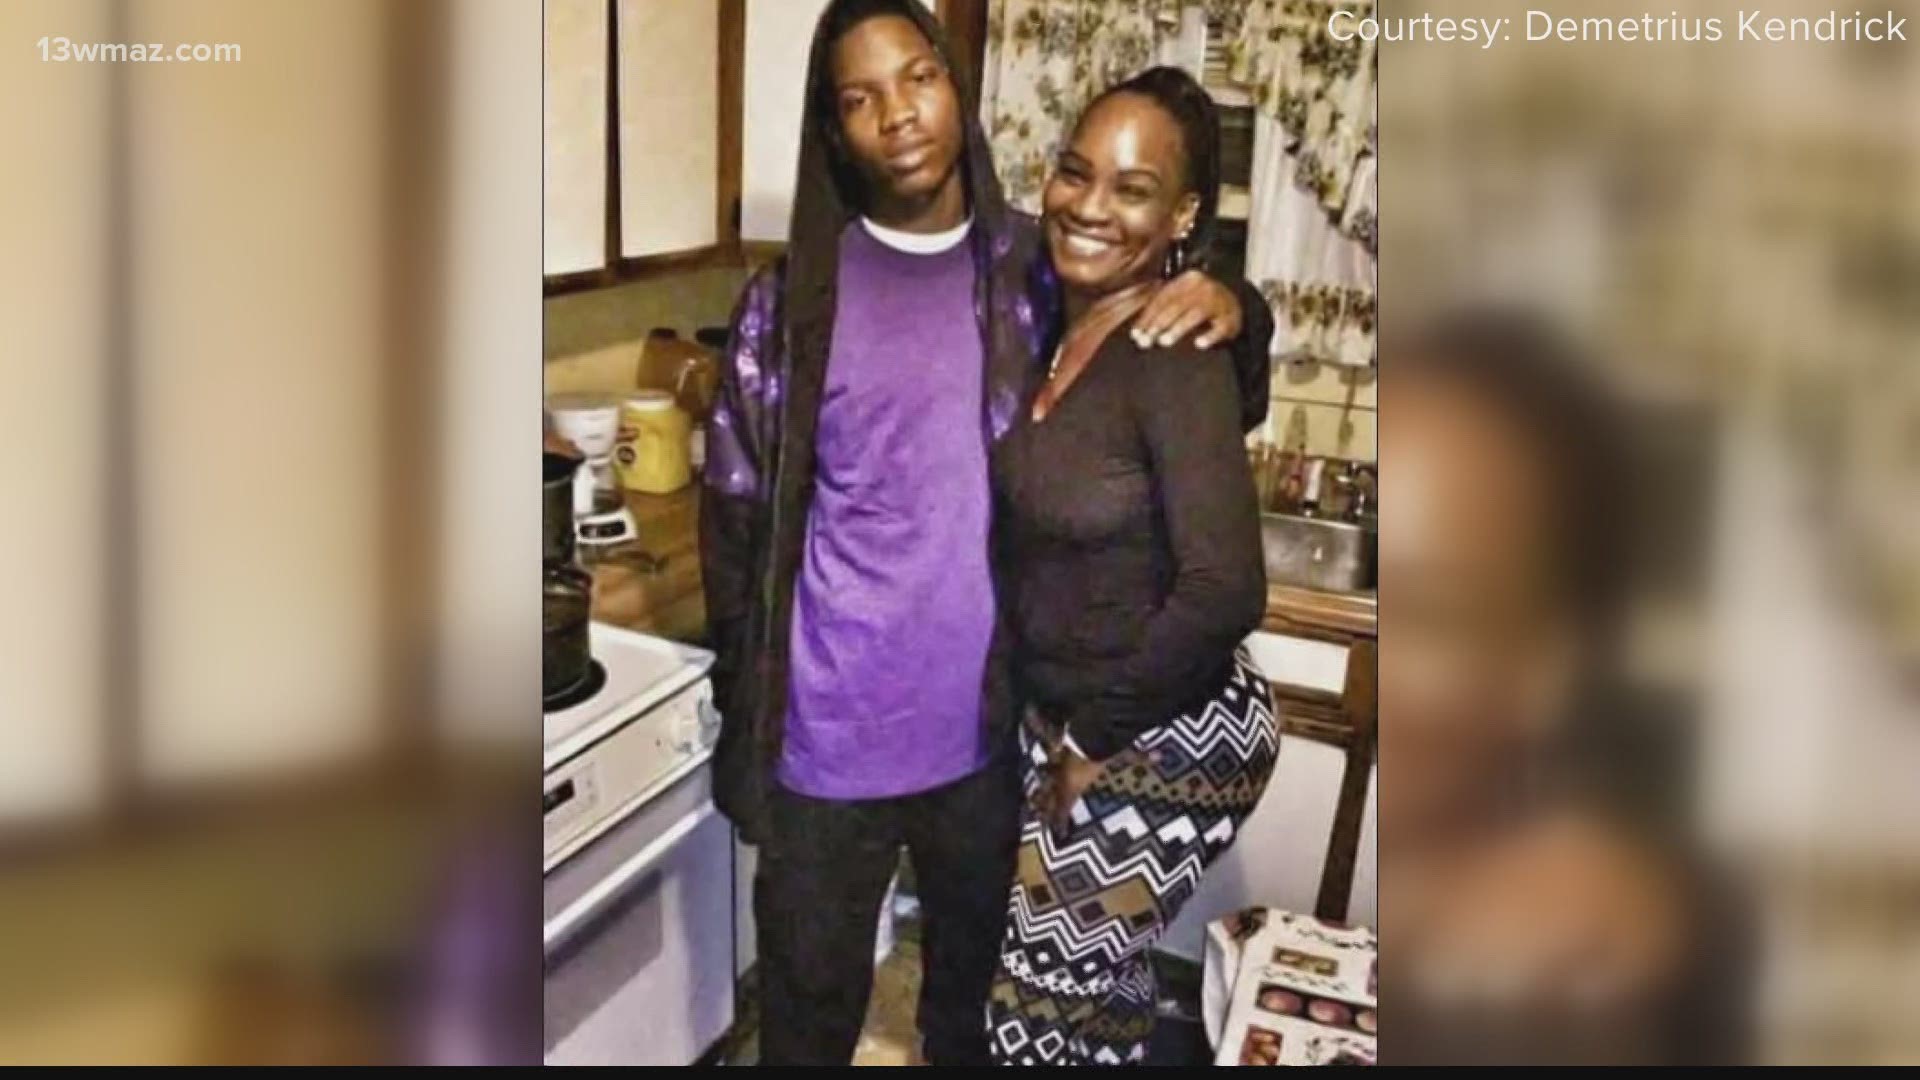 In March, La'Terry Kendrick was killed outside of a convenience store on Houston Avenue.